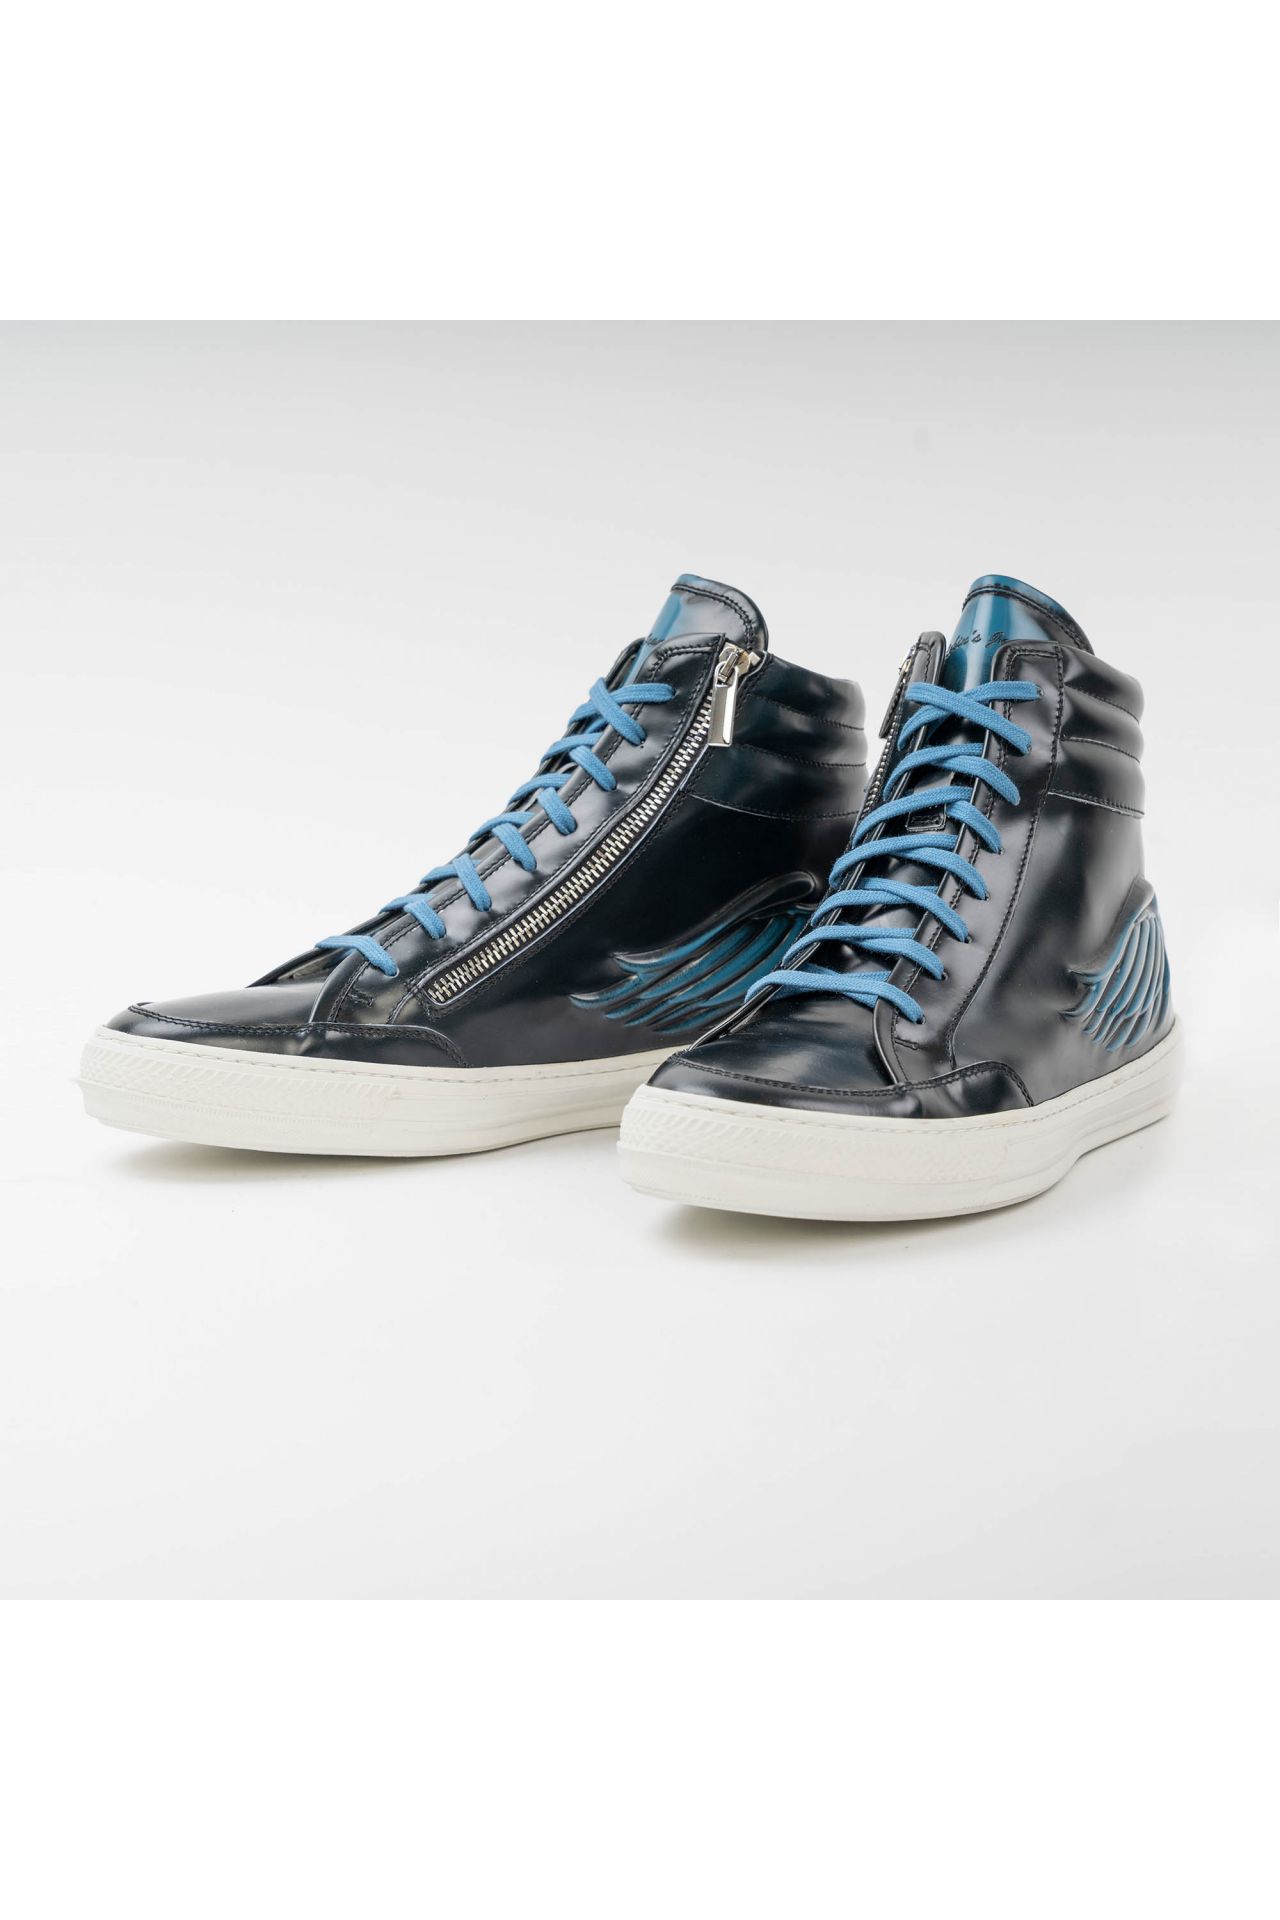 MENS HIGH TOP LAMINATED LEATHER SNEAKERS IN DARK BLUE